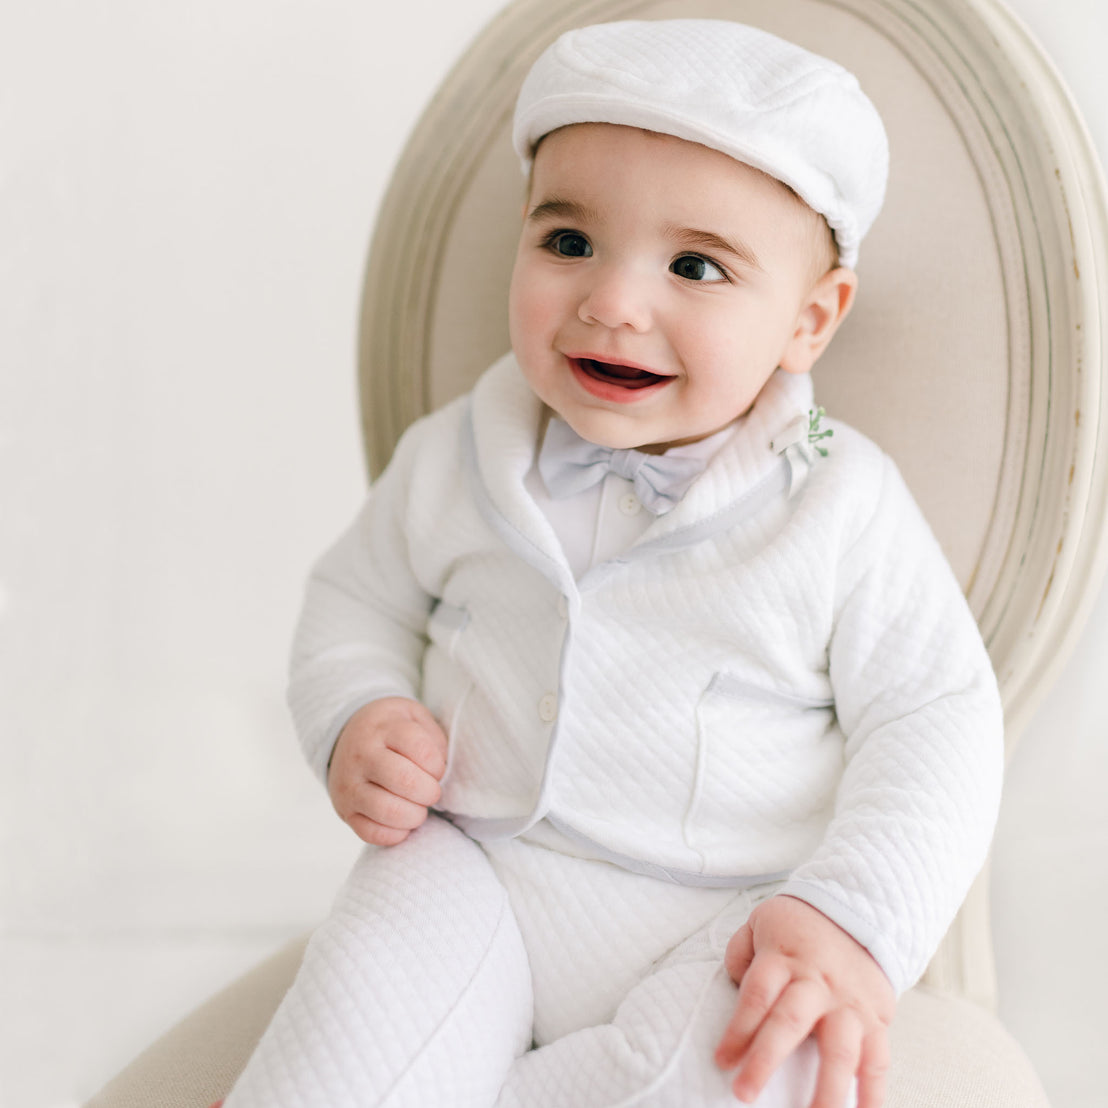 A smiling baby dressed in a Harrison 3-Piece Pants Suit and cap, sitting on an antique-style chair with a plain background, exuding happiness.